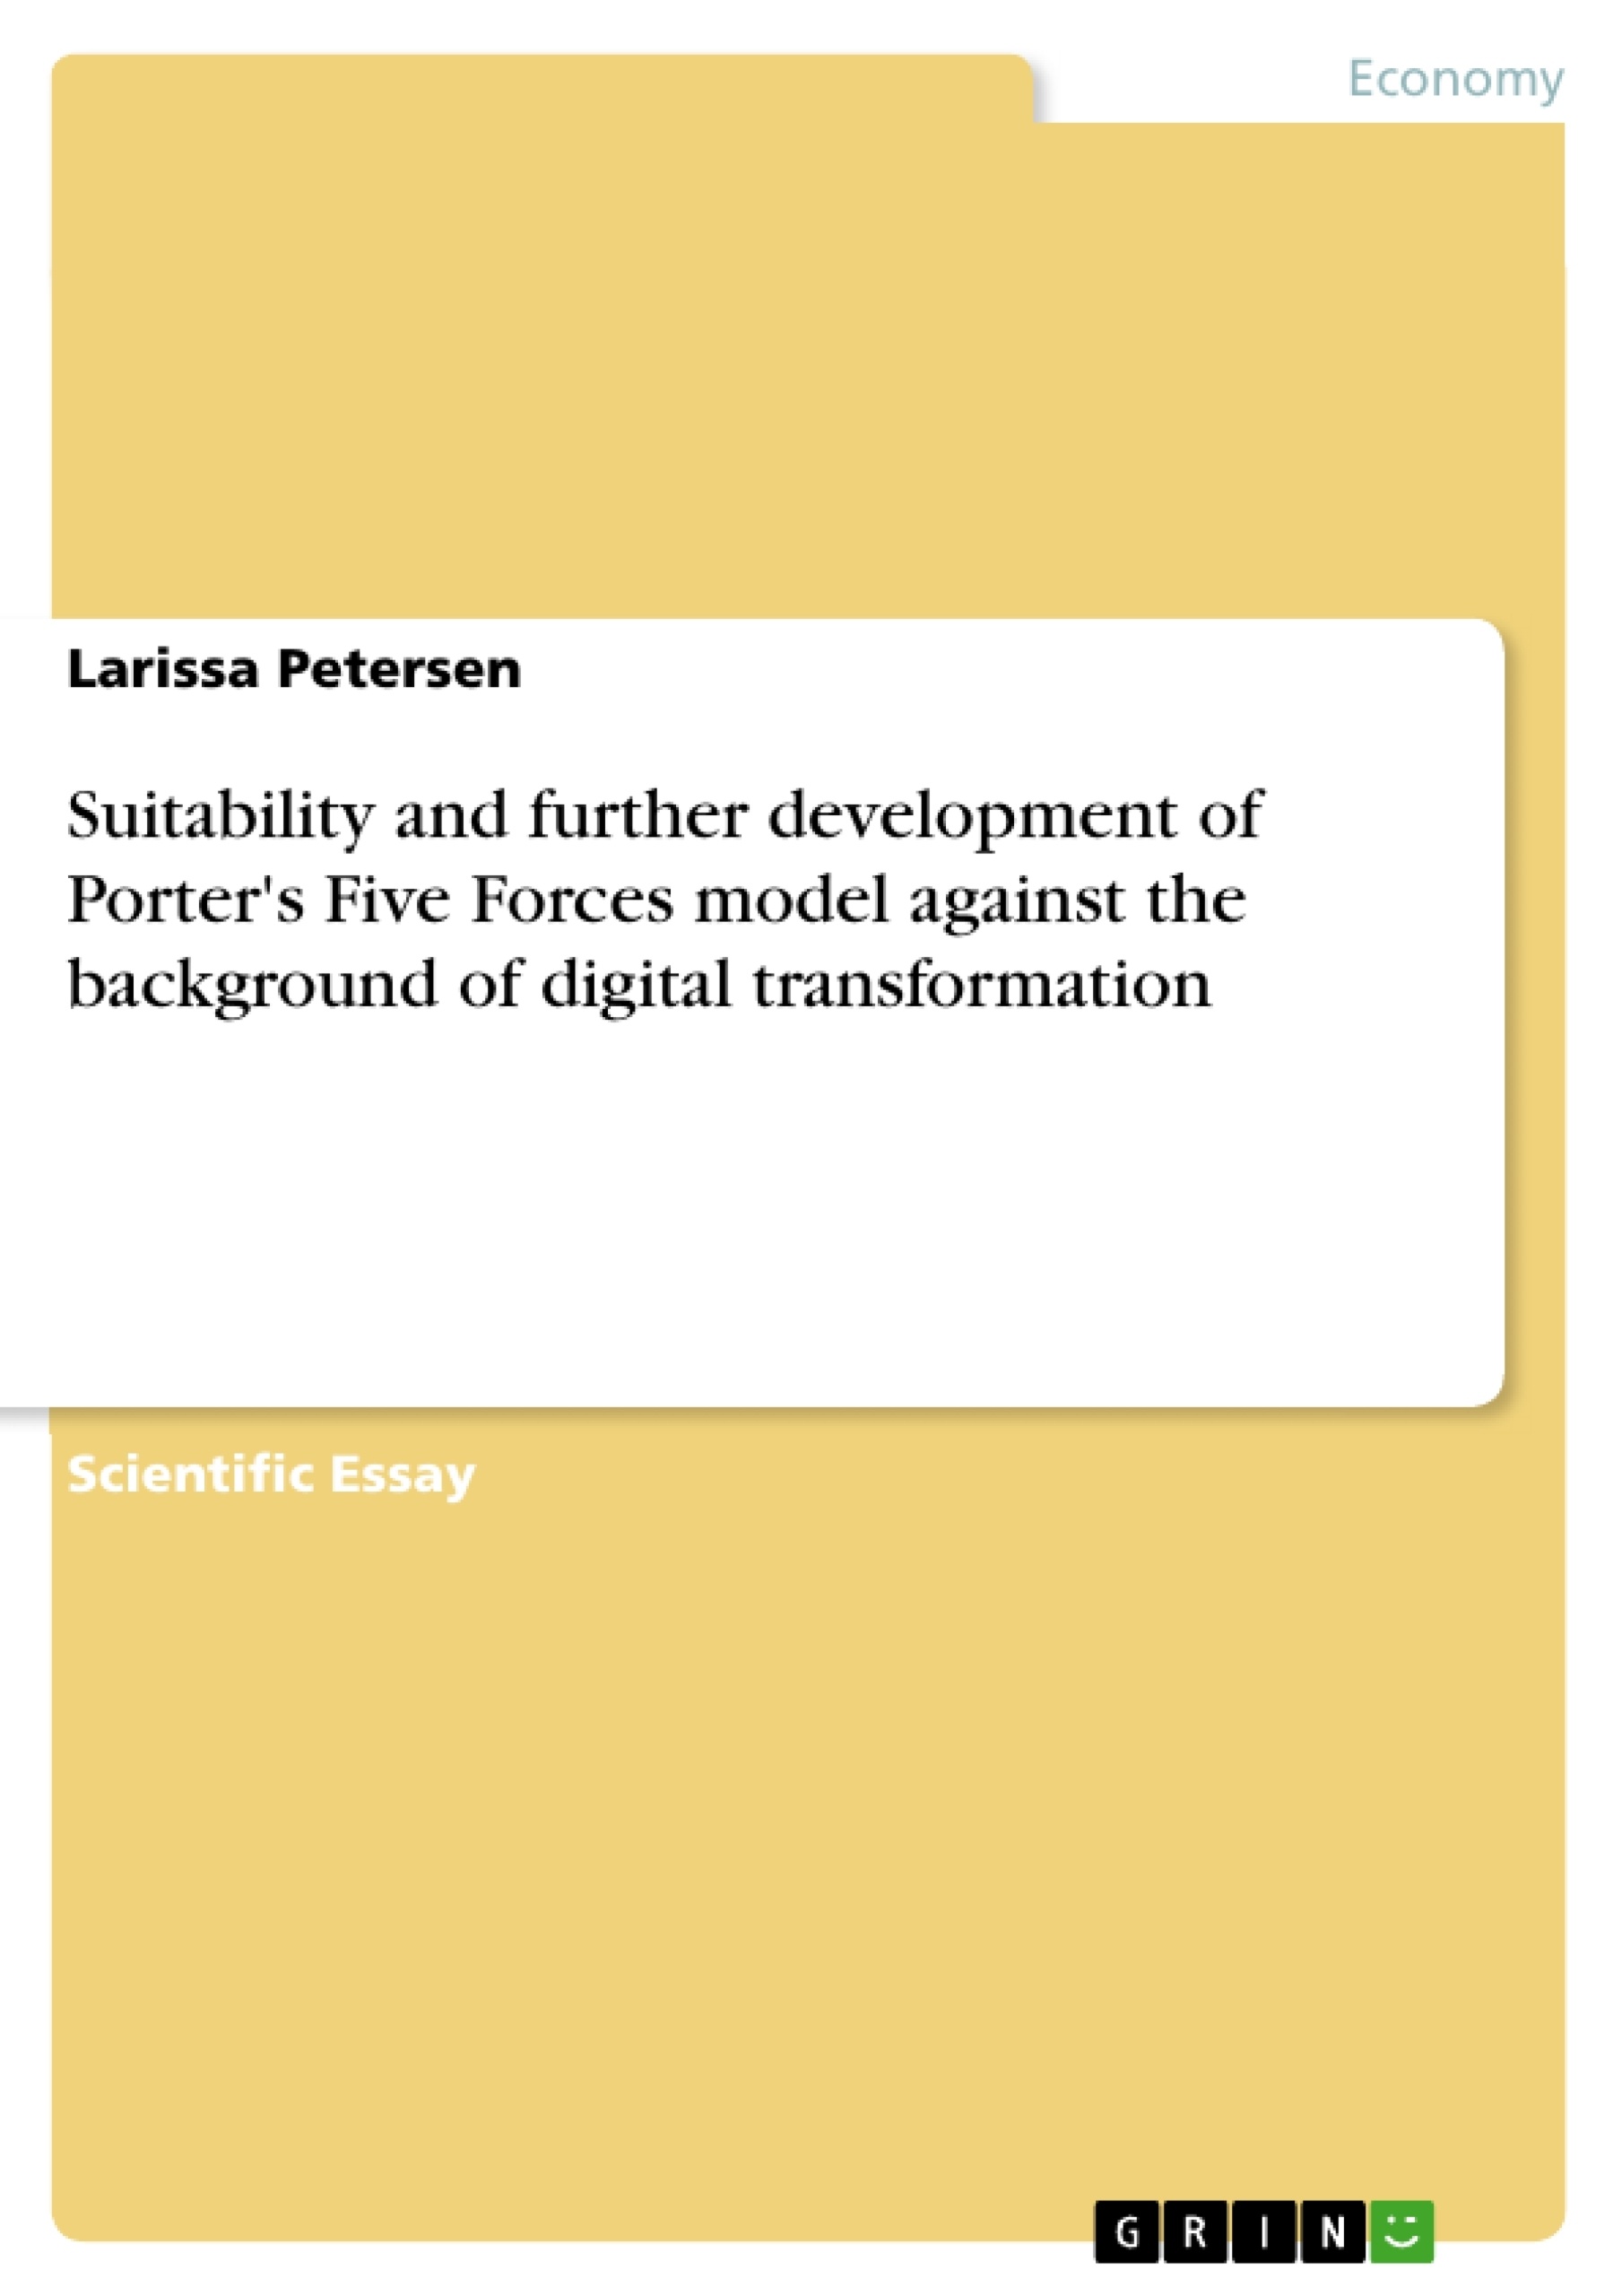 Título: Suitability and further development of Porter's Five Forces model against the background of digital transformation